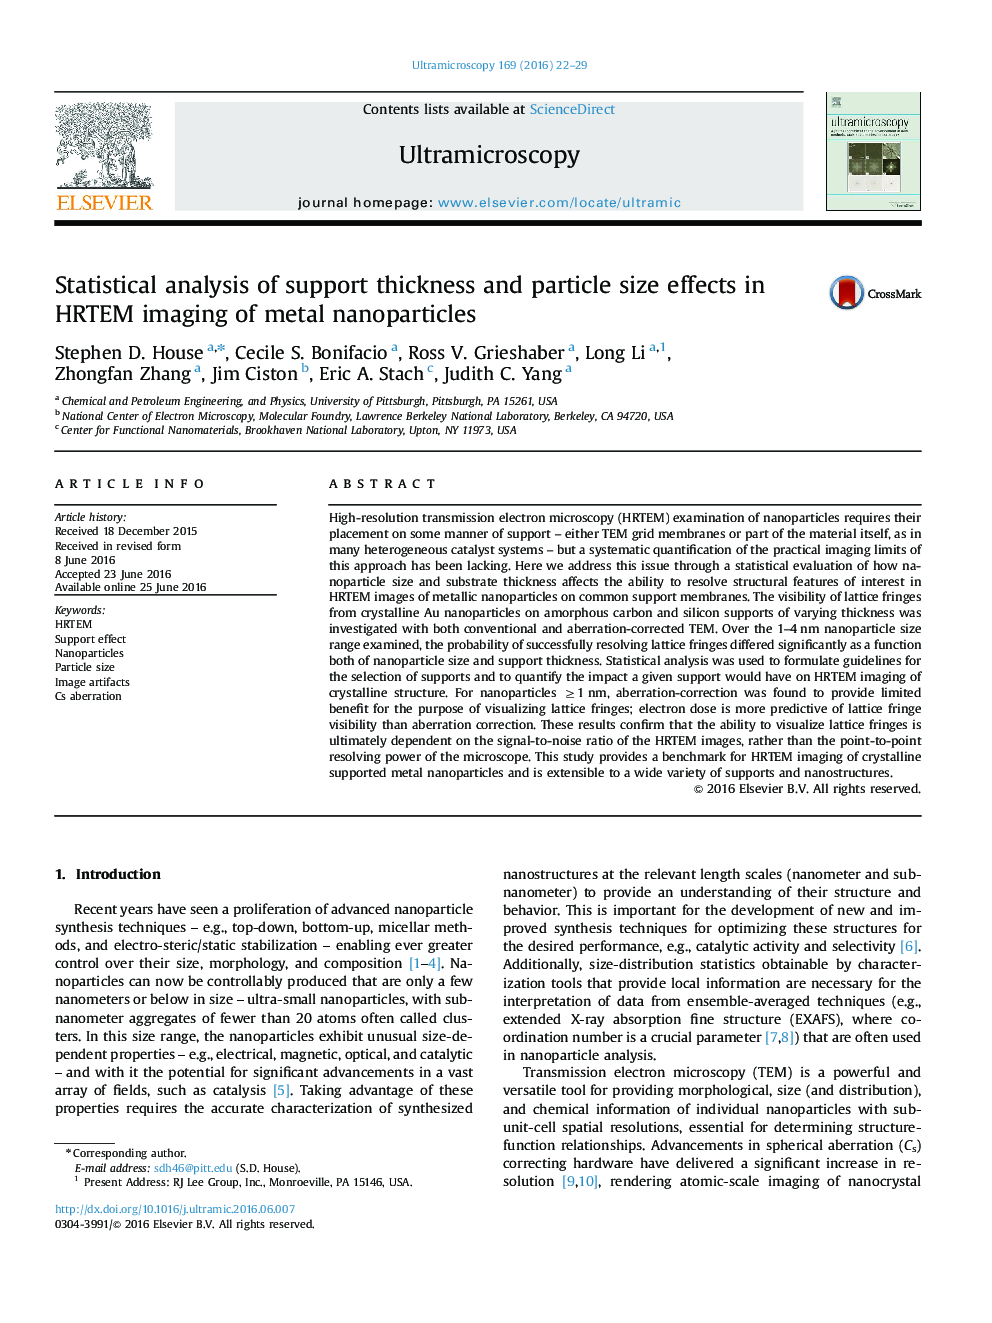 Statistical analysis of support thickness and particle size effects in HRTEM imaging of metal nanoparticles